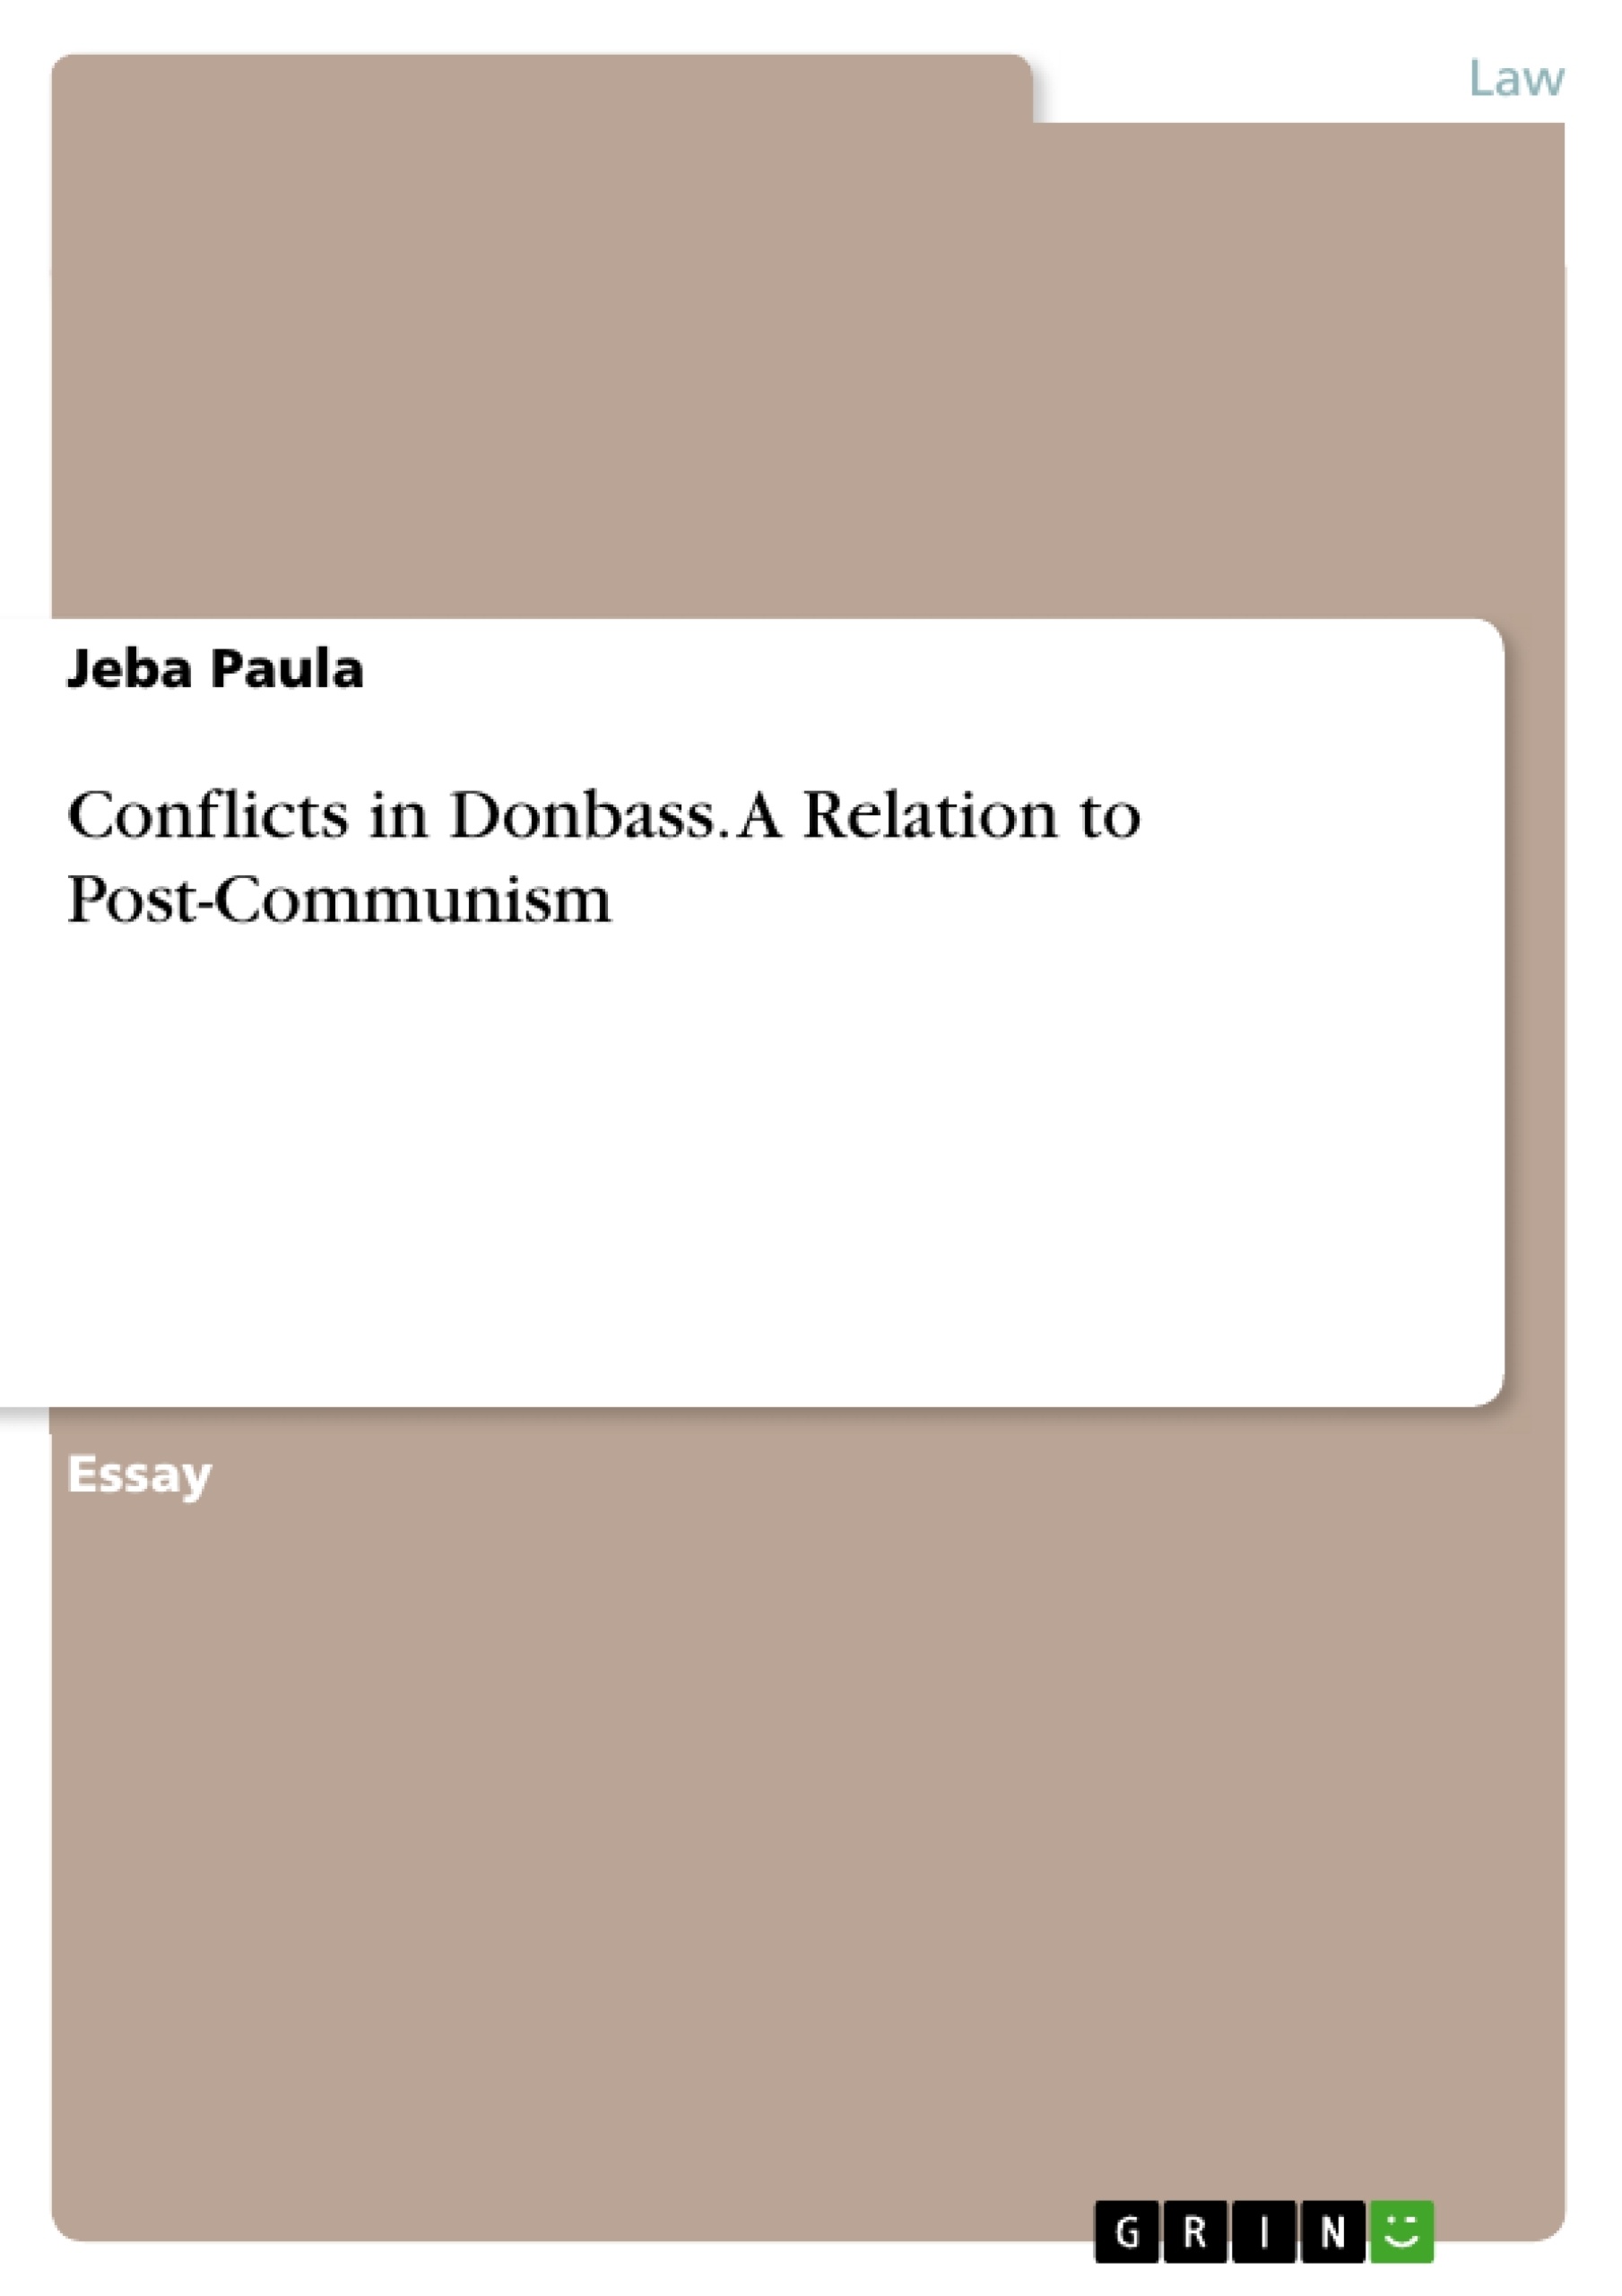 Titel: Conflicts in Donbass. A Relation to Post-Communism